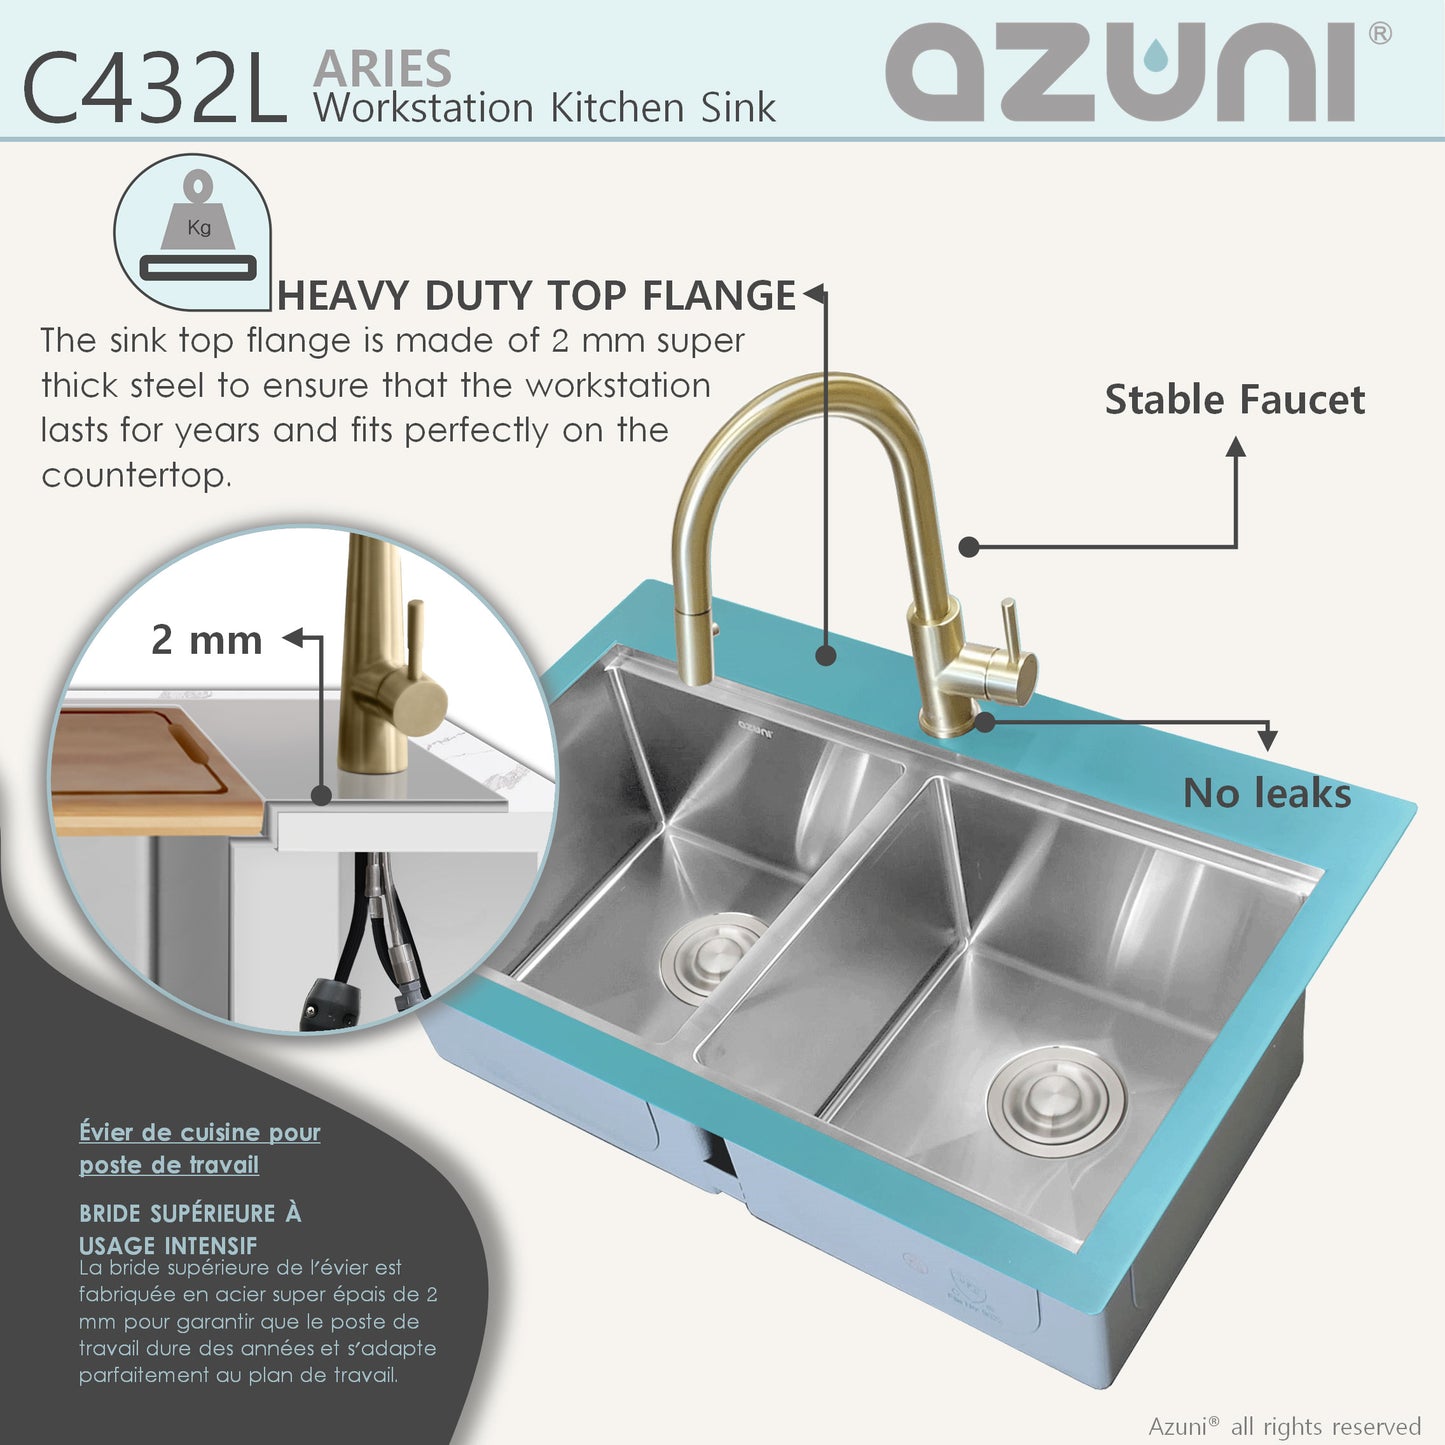 AZUNI 30"L x 20.5"W Aries Top mounted Double Bowl Stainless Steel Ledge Workstation Kitchen Sink accessories included